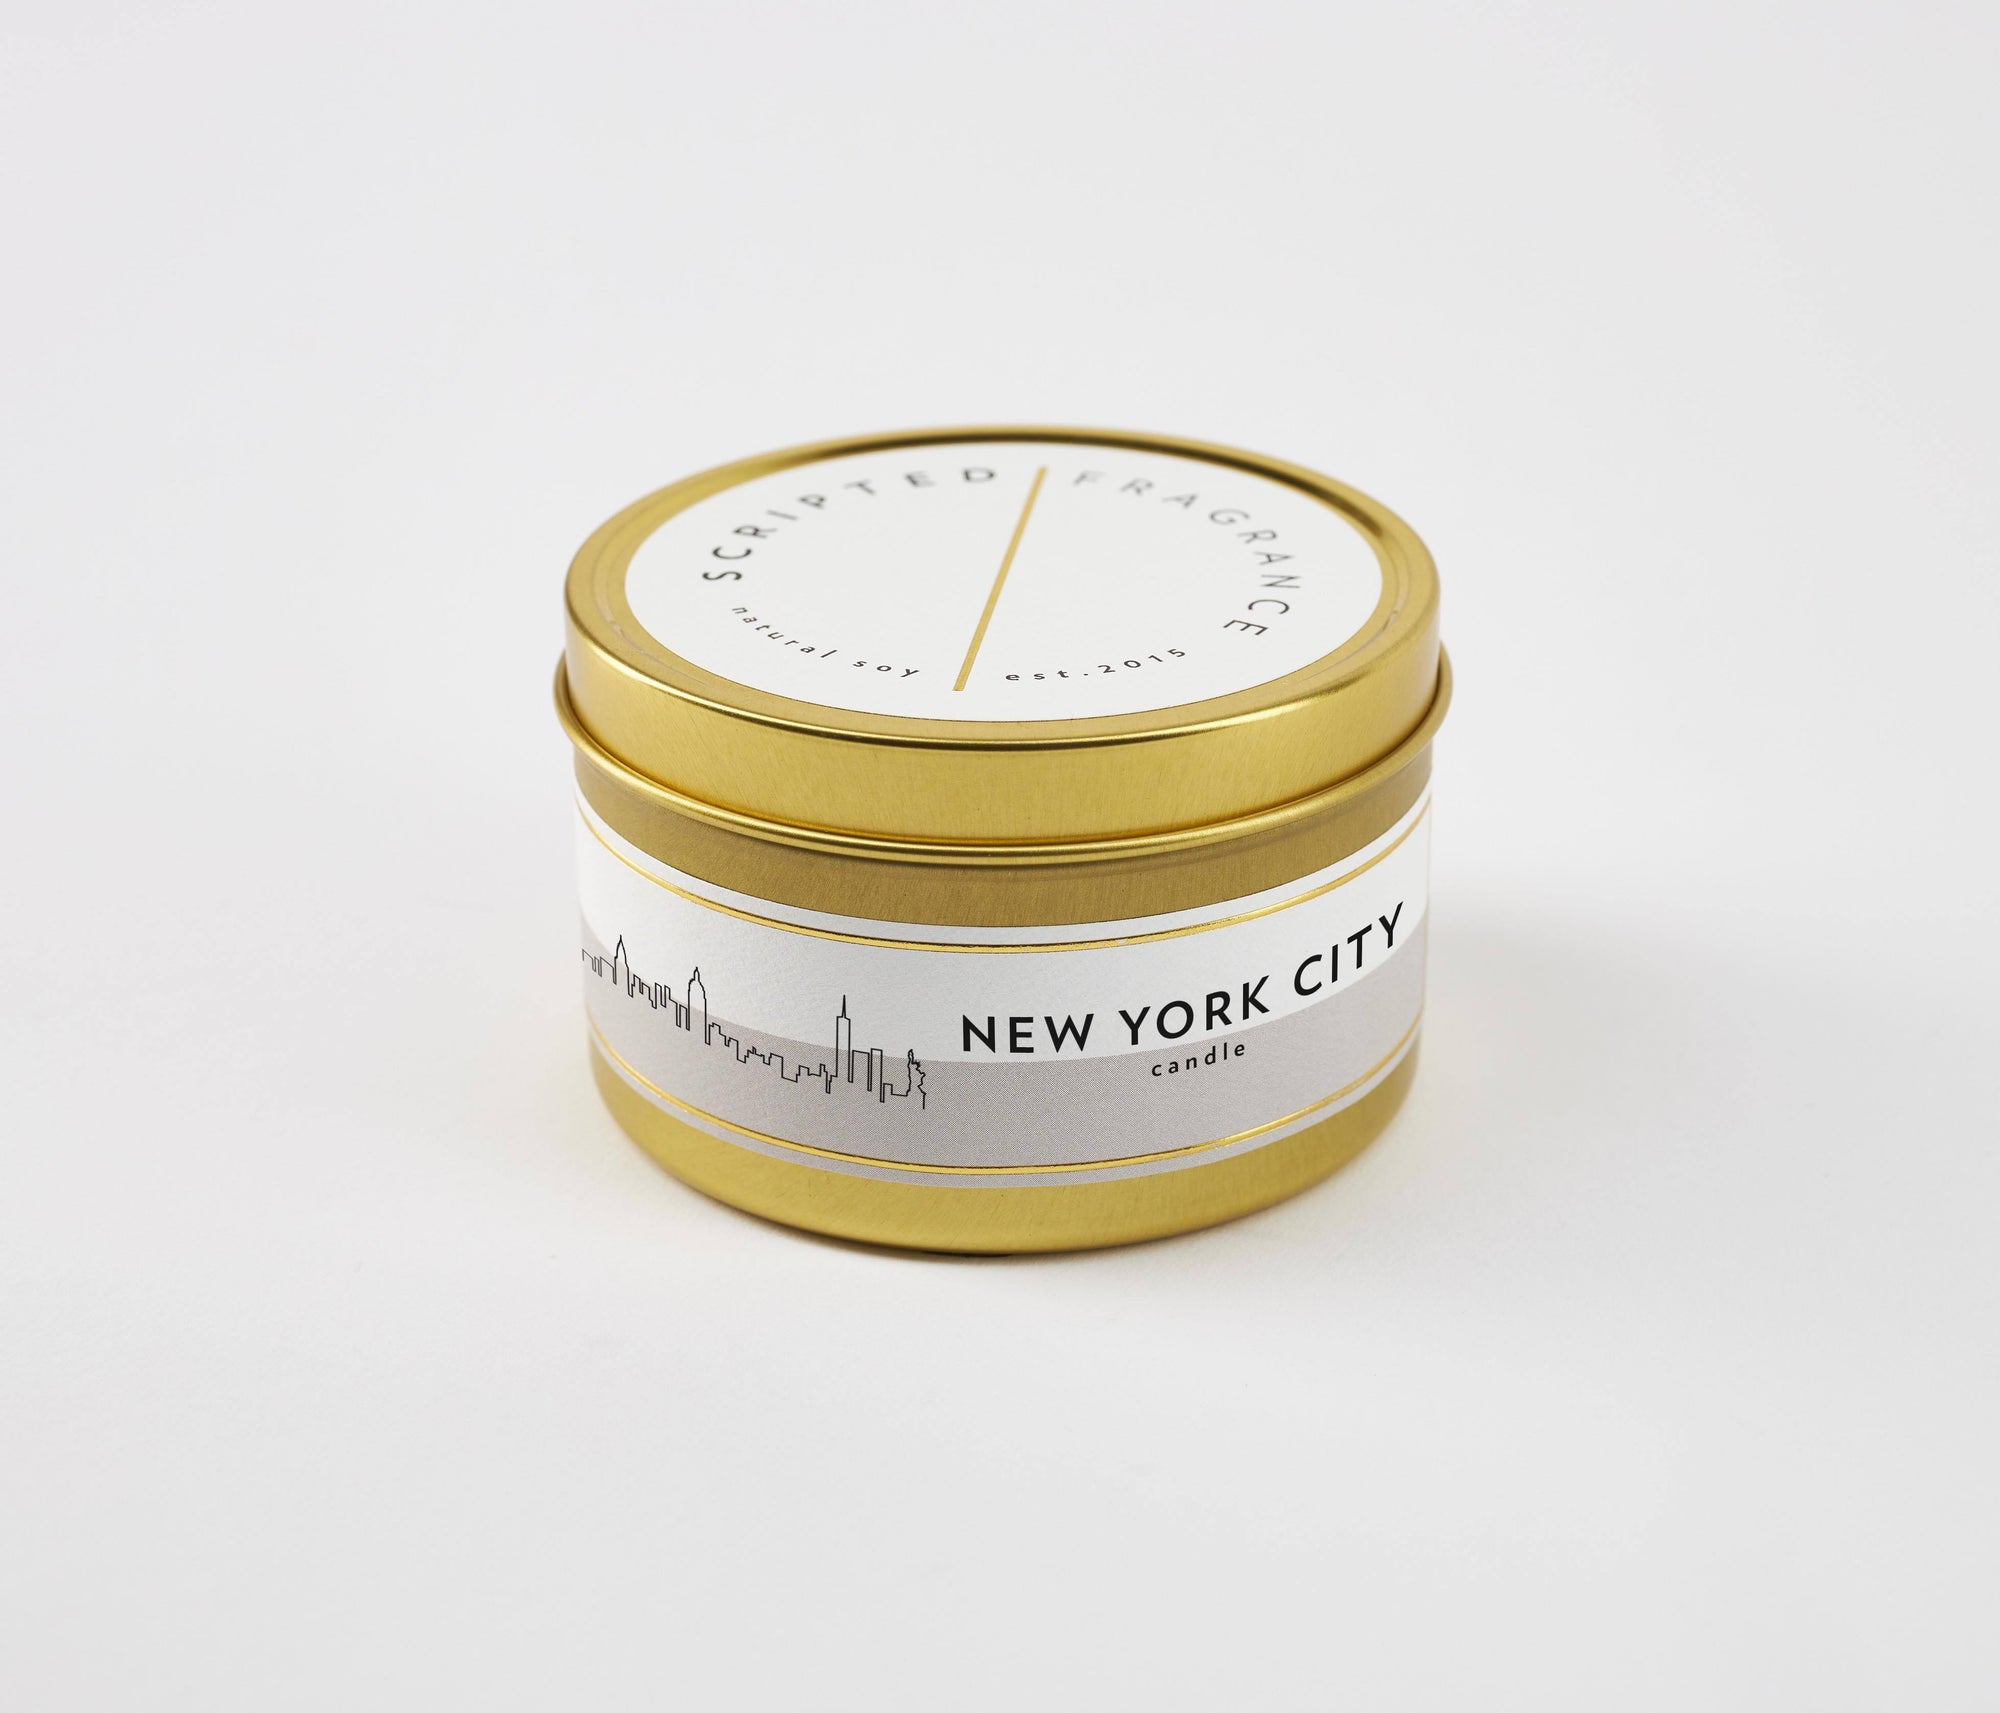 New York City Soy Candle